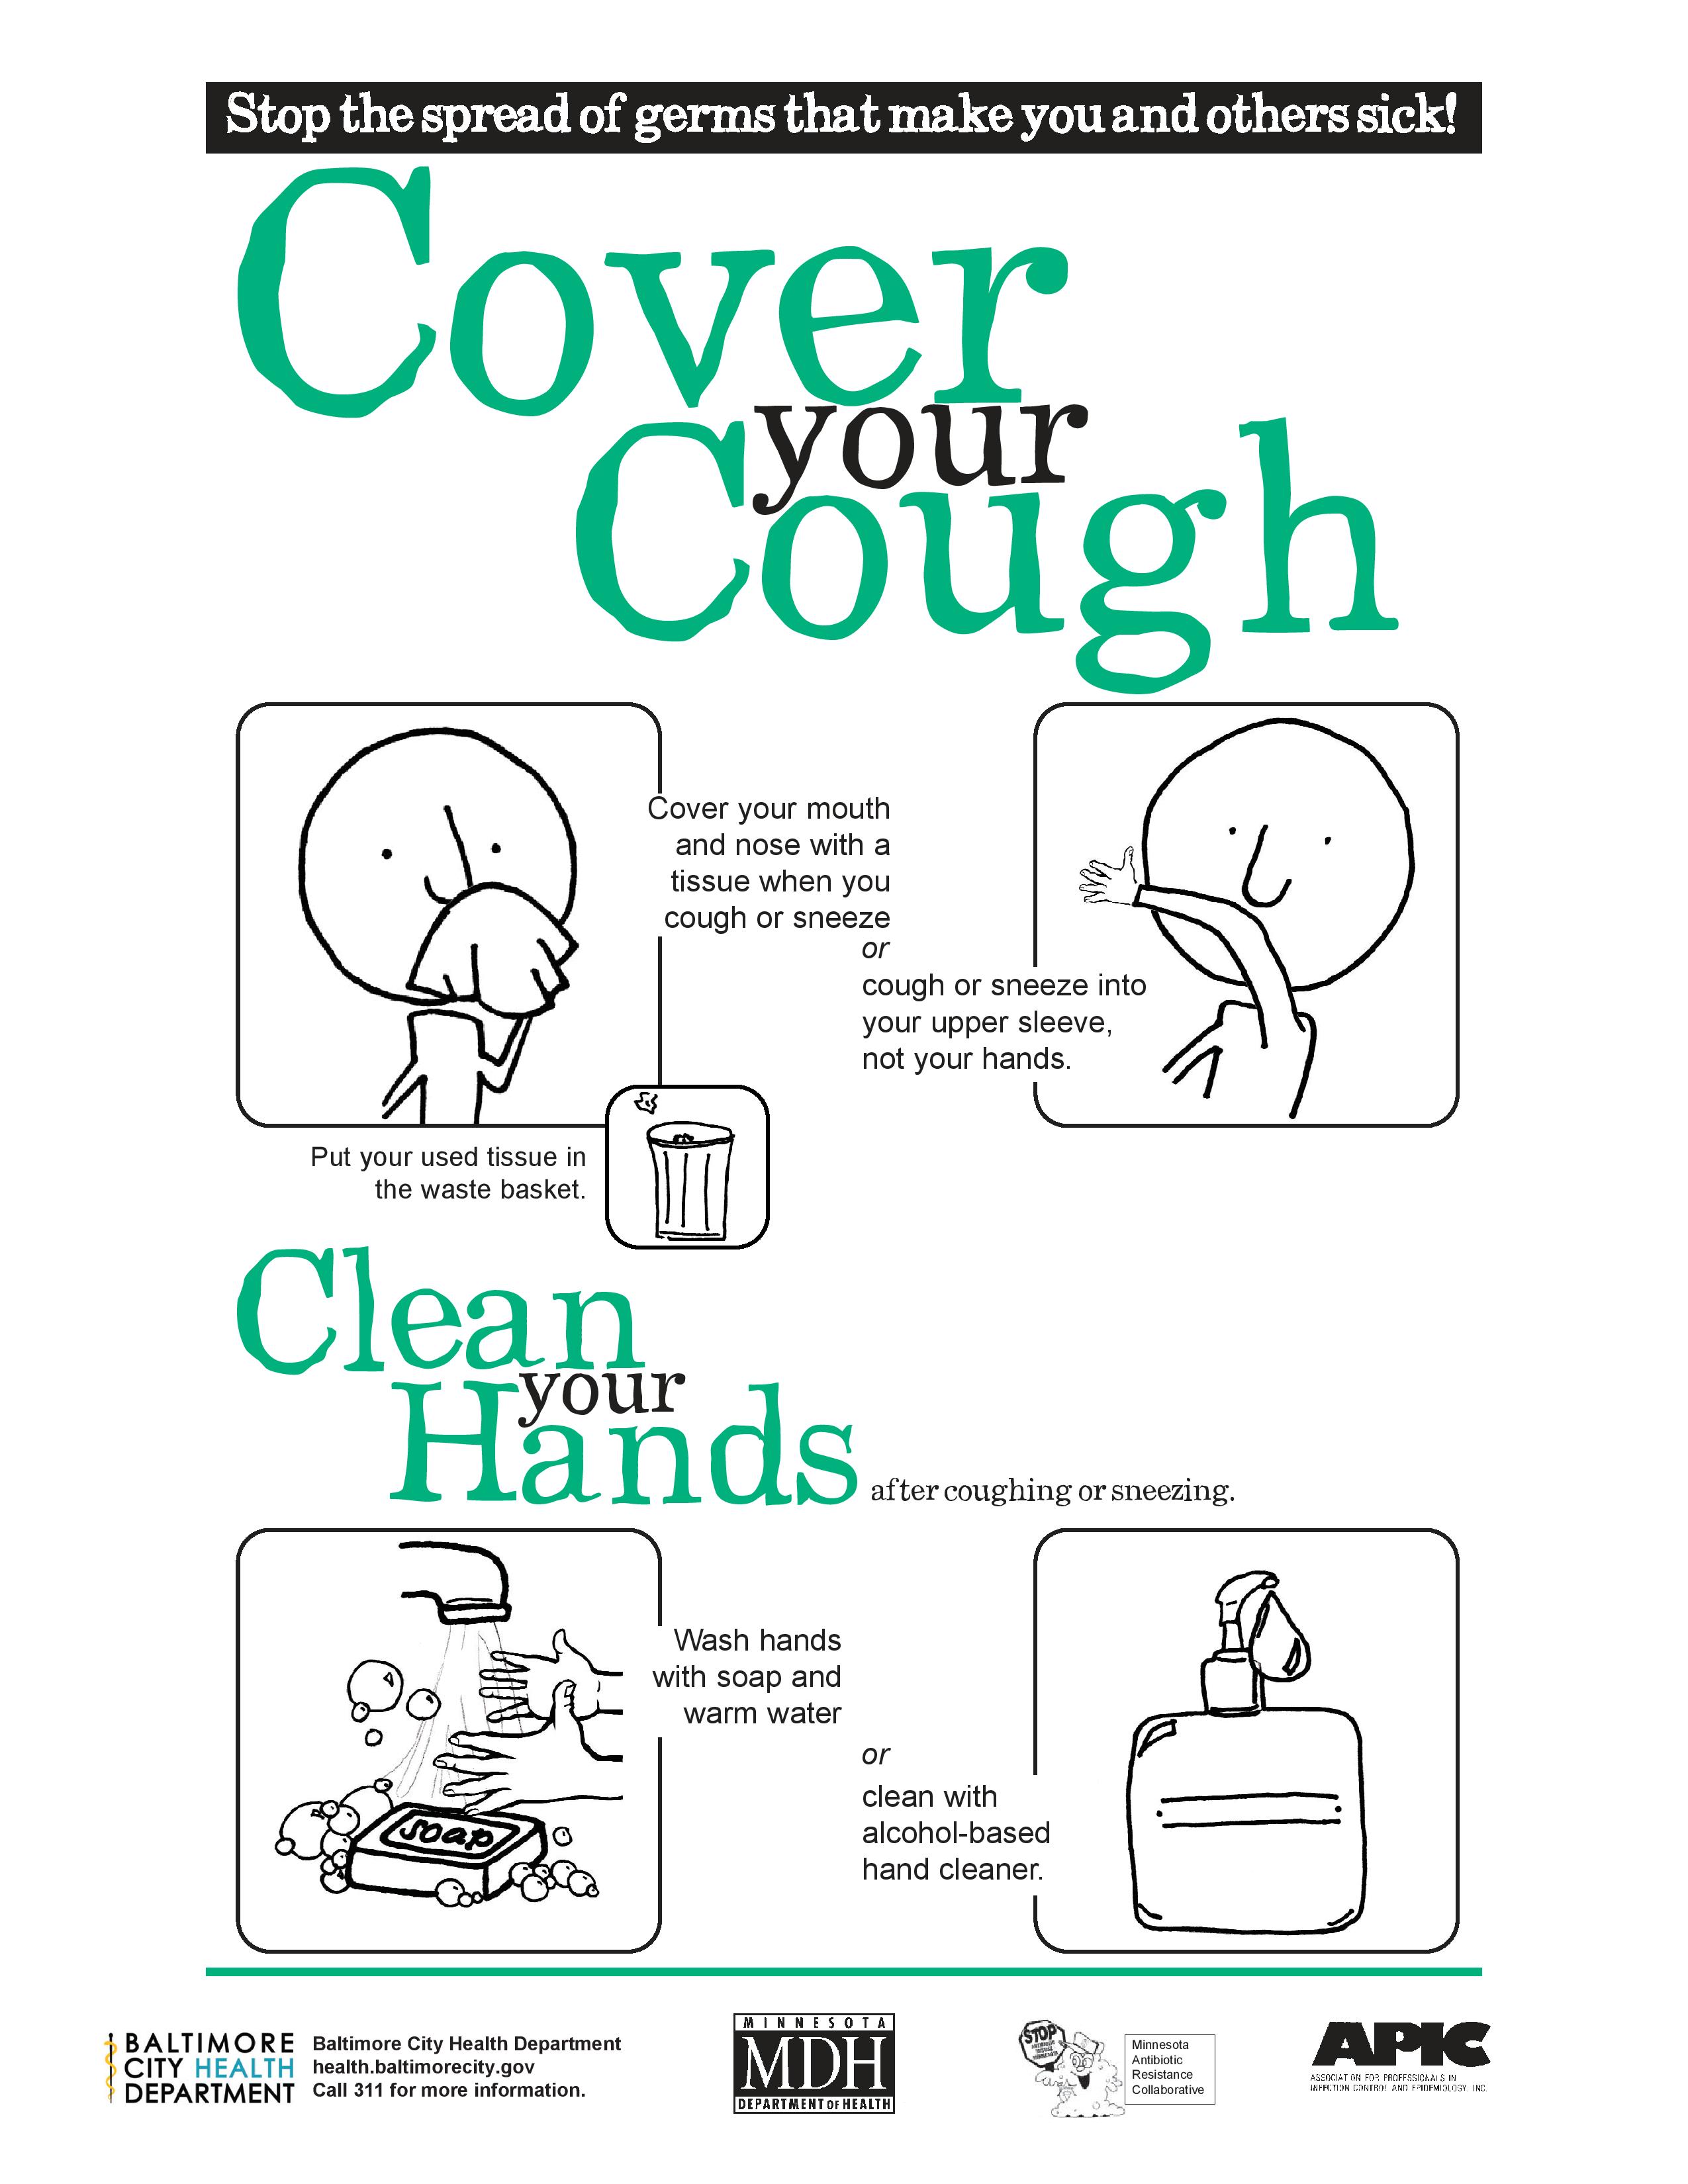 Cover your cough to stop the spread of germs